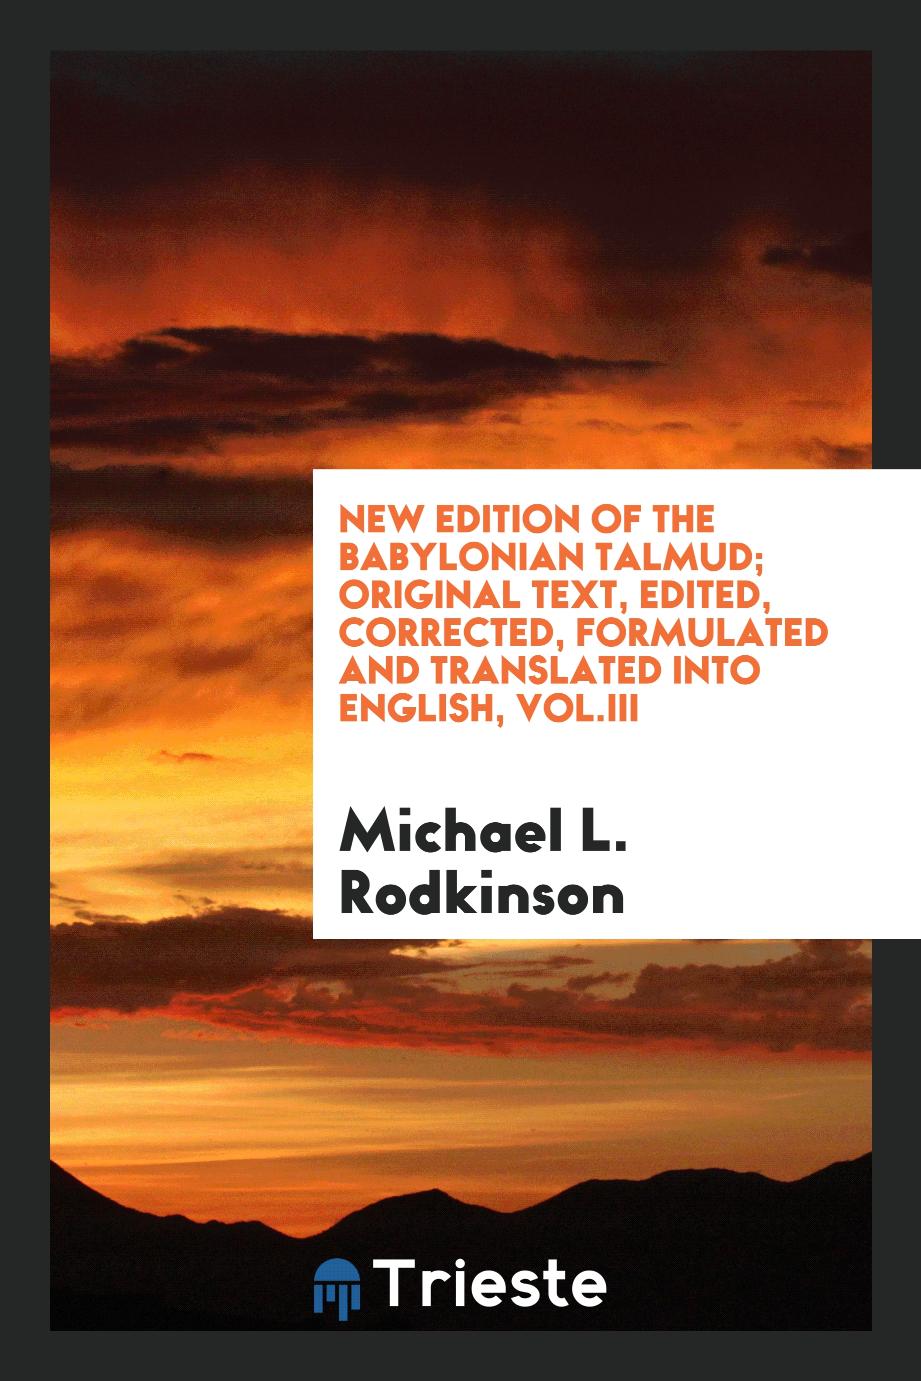 New edition of the Babylonian Talmud; original text, edited, corrected, formulated and translated into English, Vol.III